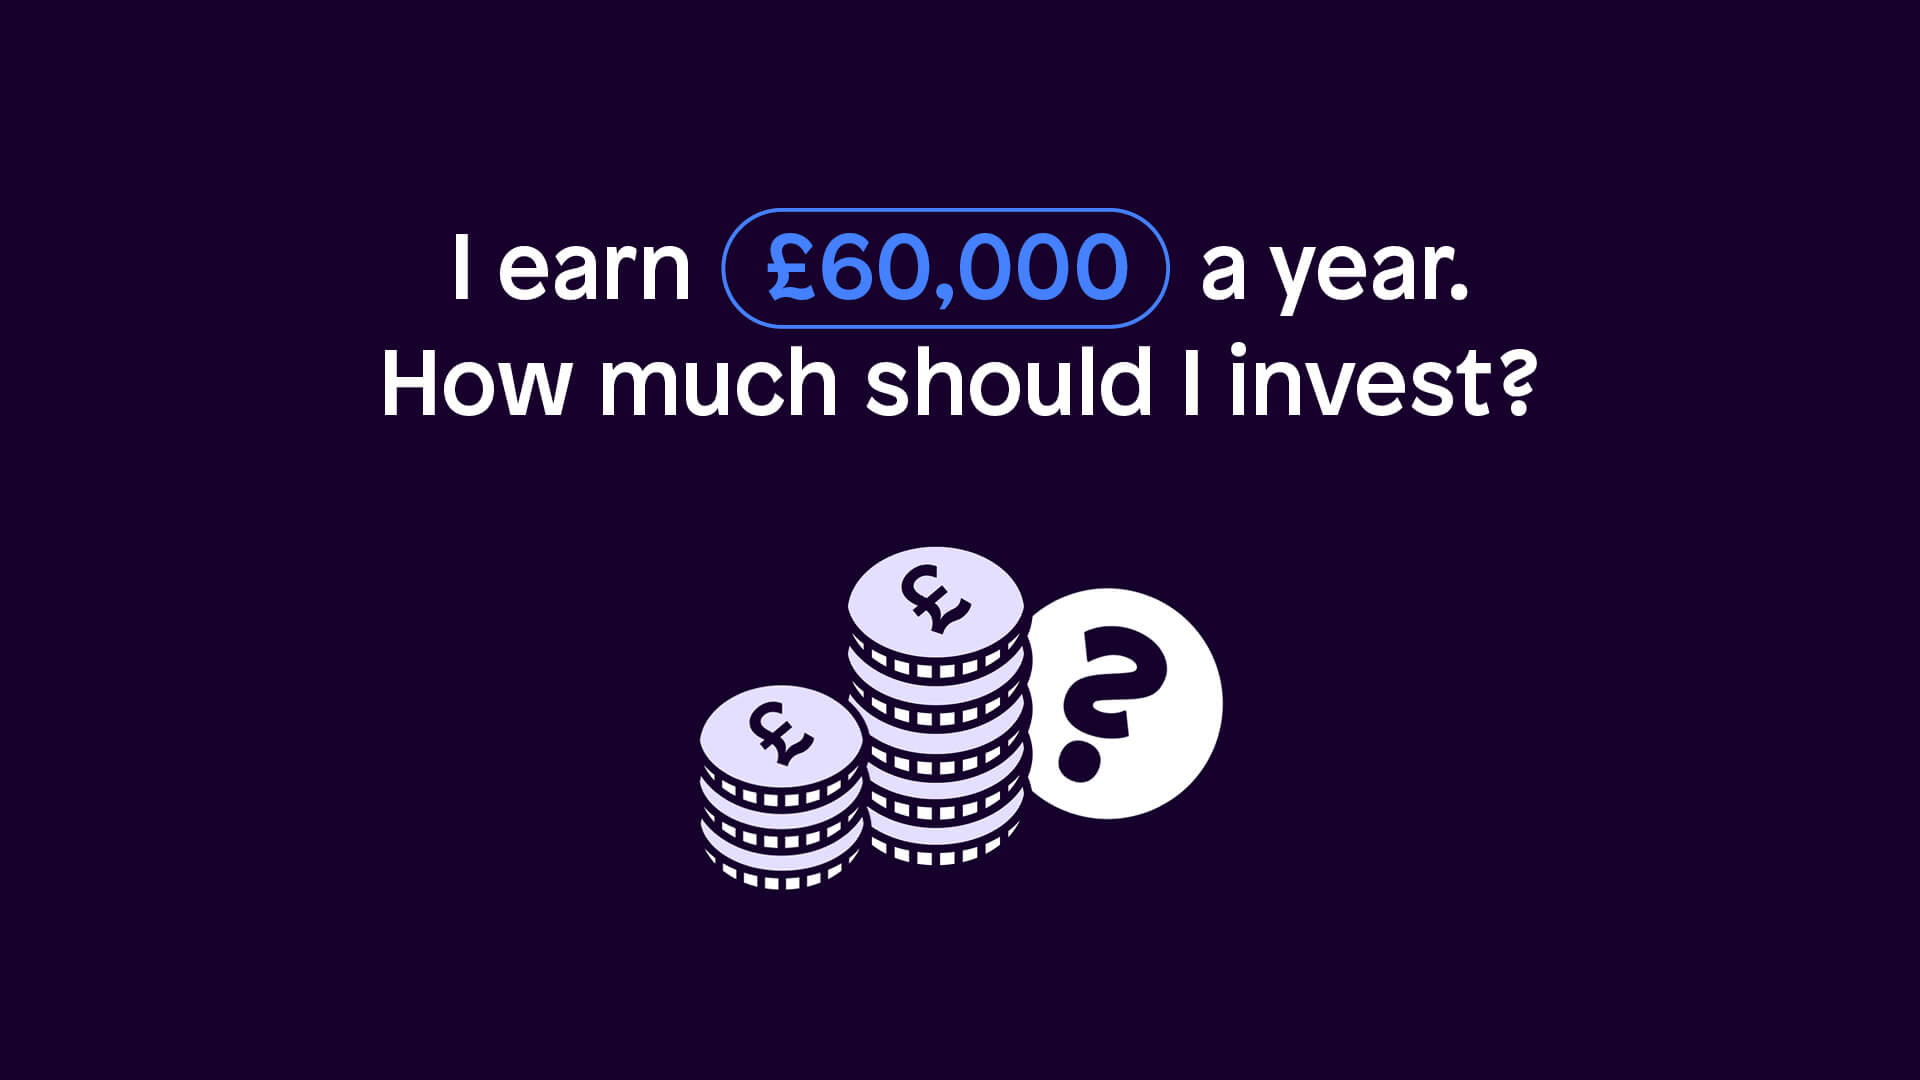 How much should I invest earning £60,000 per year?